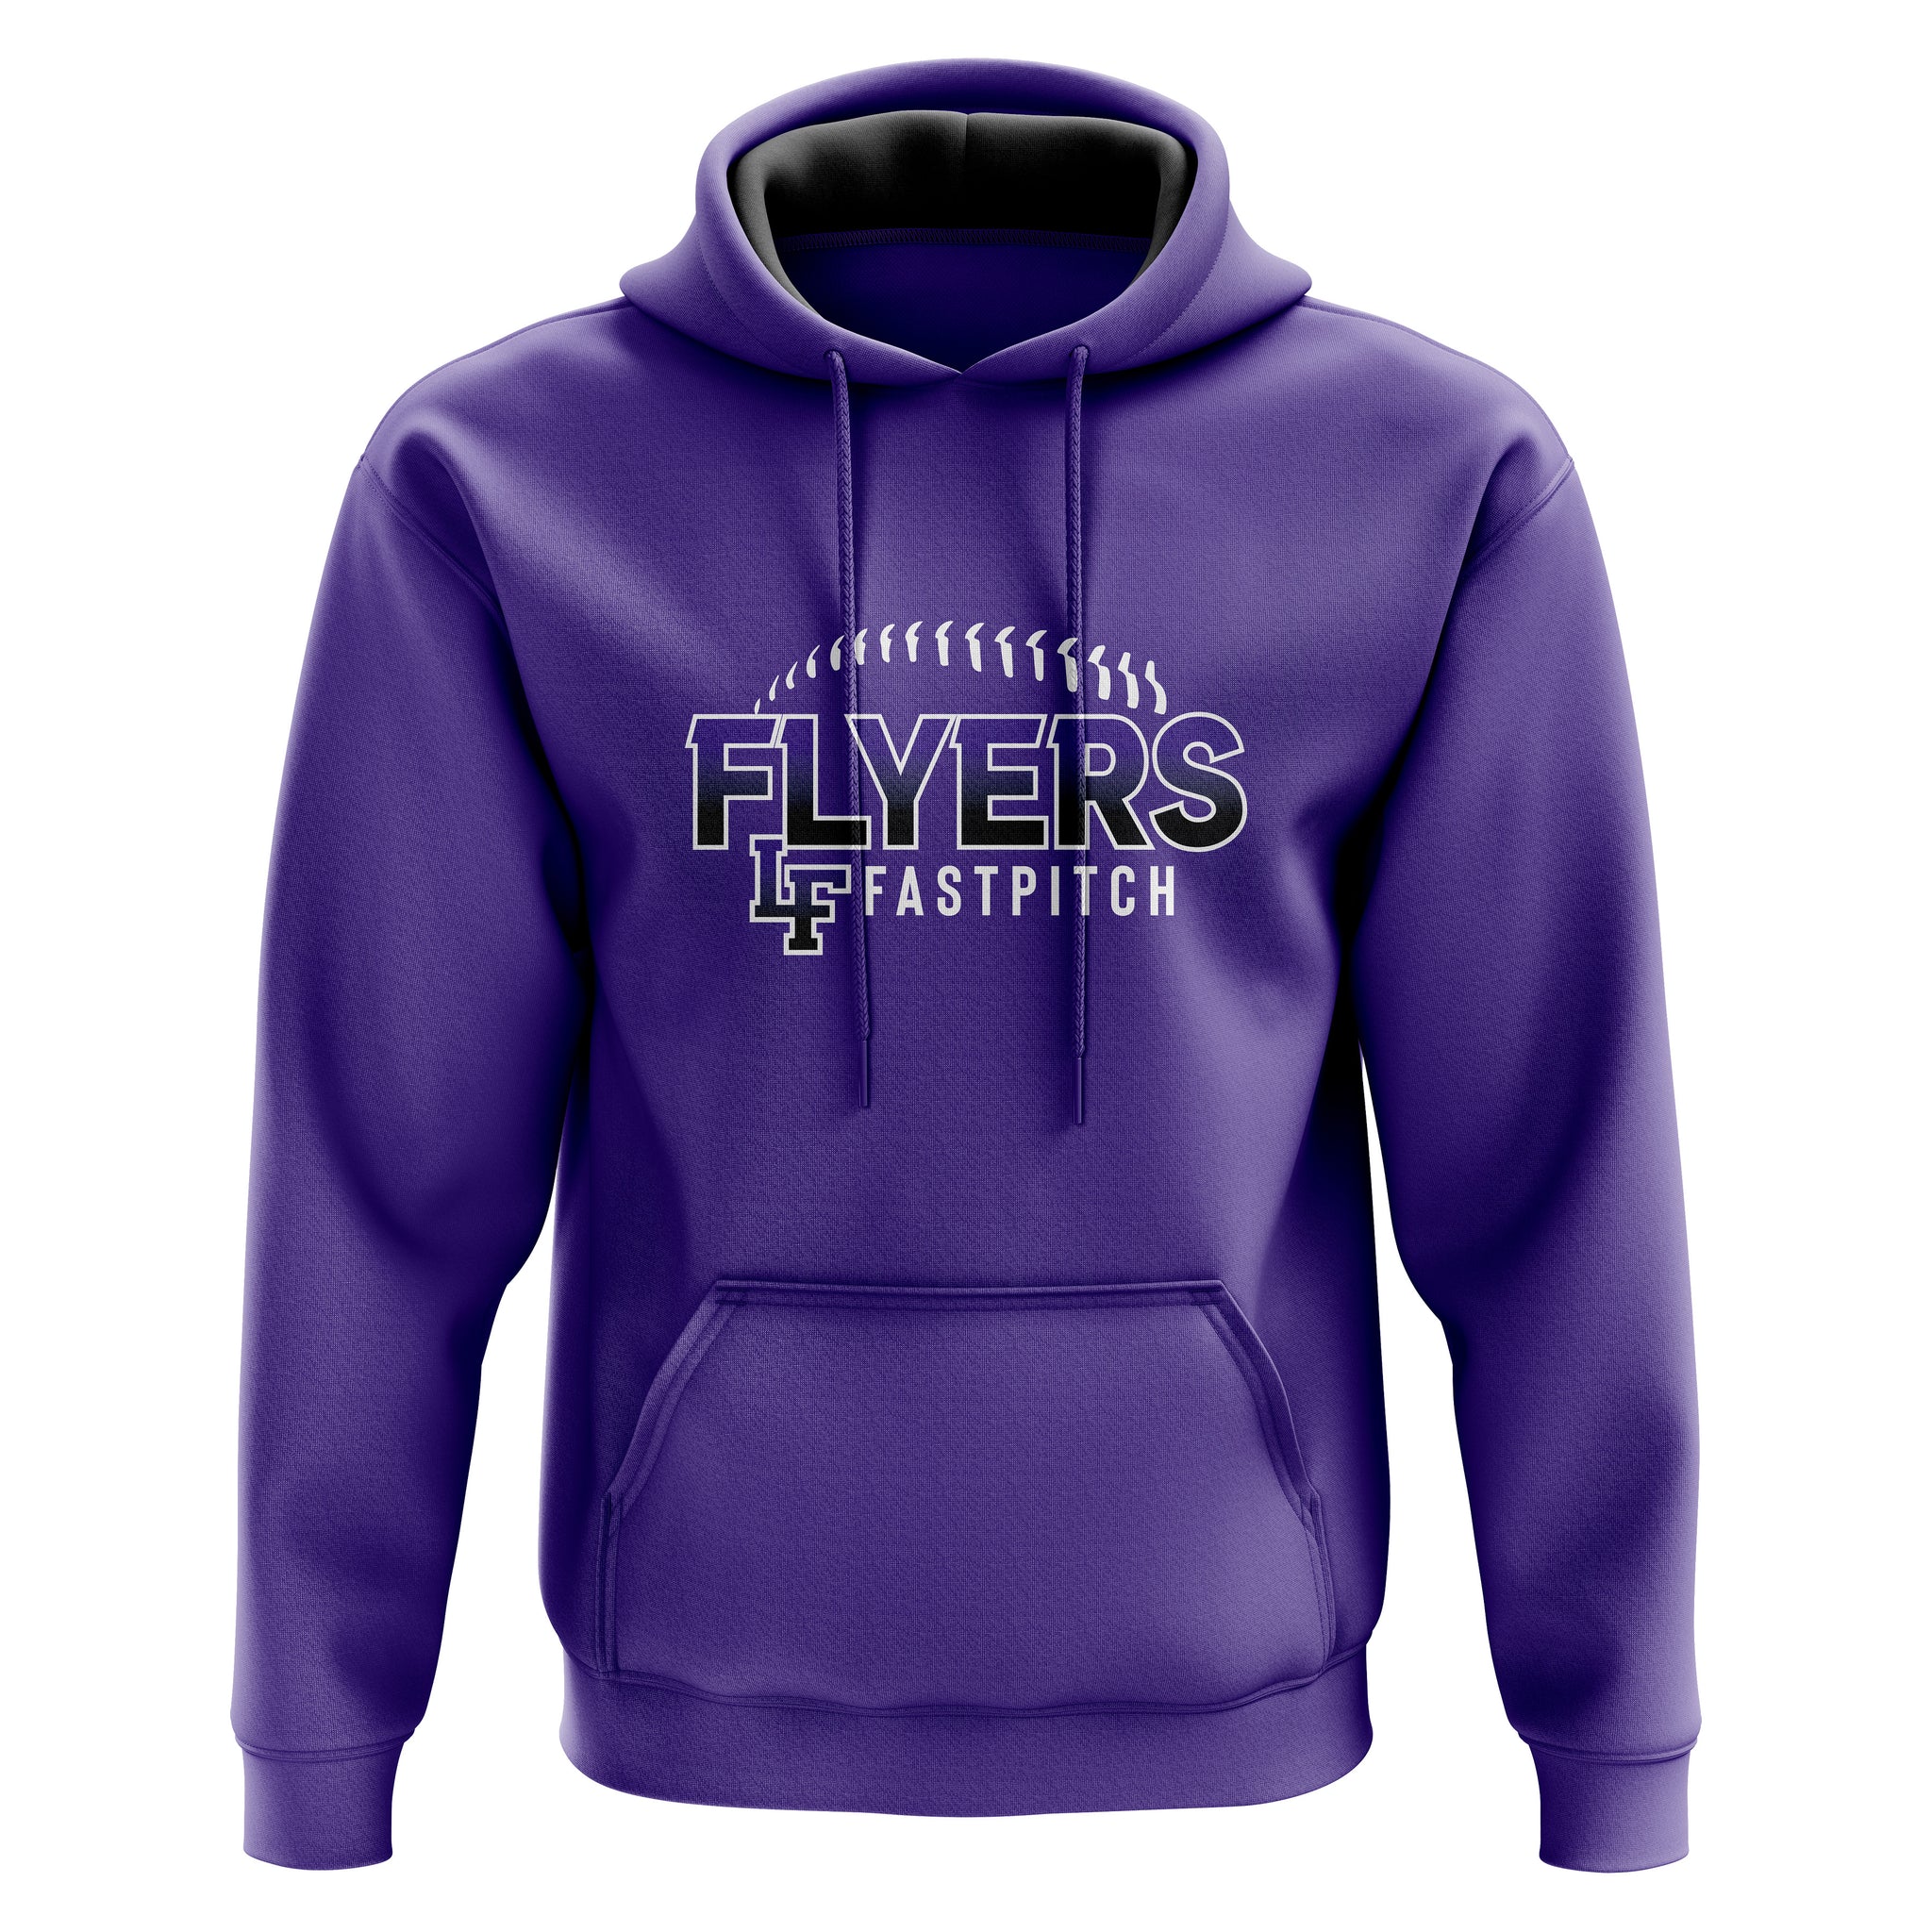 FLYERS FASTPITCH MENS FULL SUB HOODIE